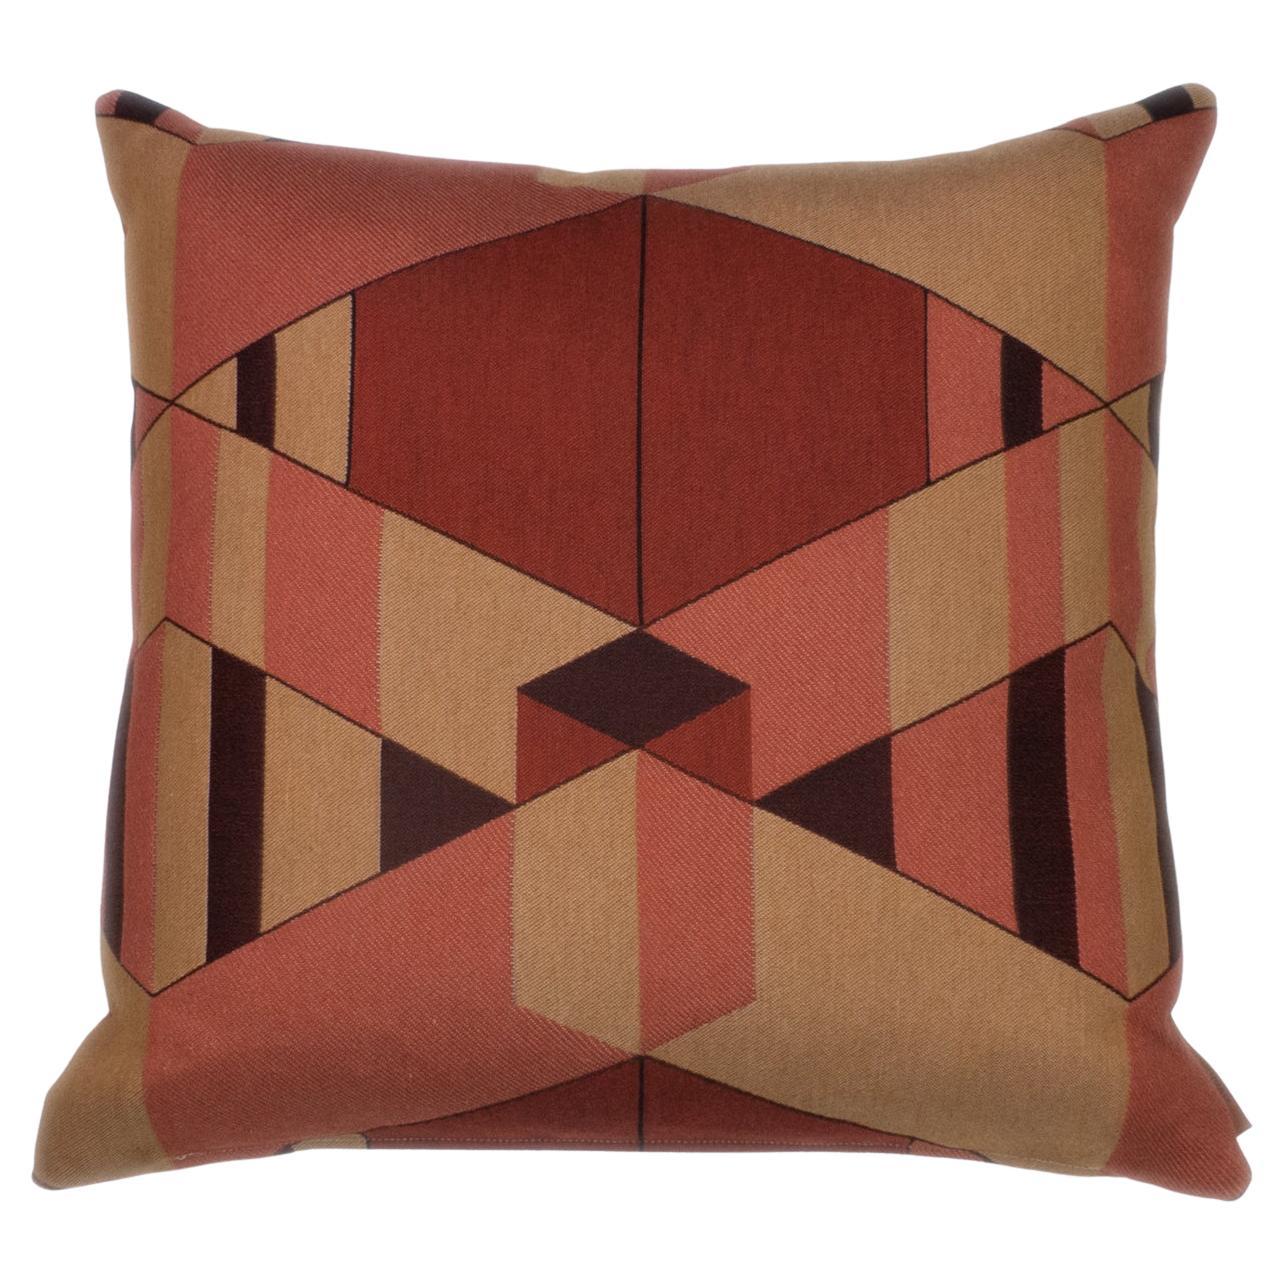 Cushion / Pattern Pillow Absolute Coup De Foudre Red by Evolution21